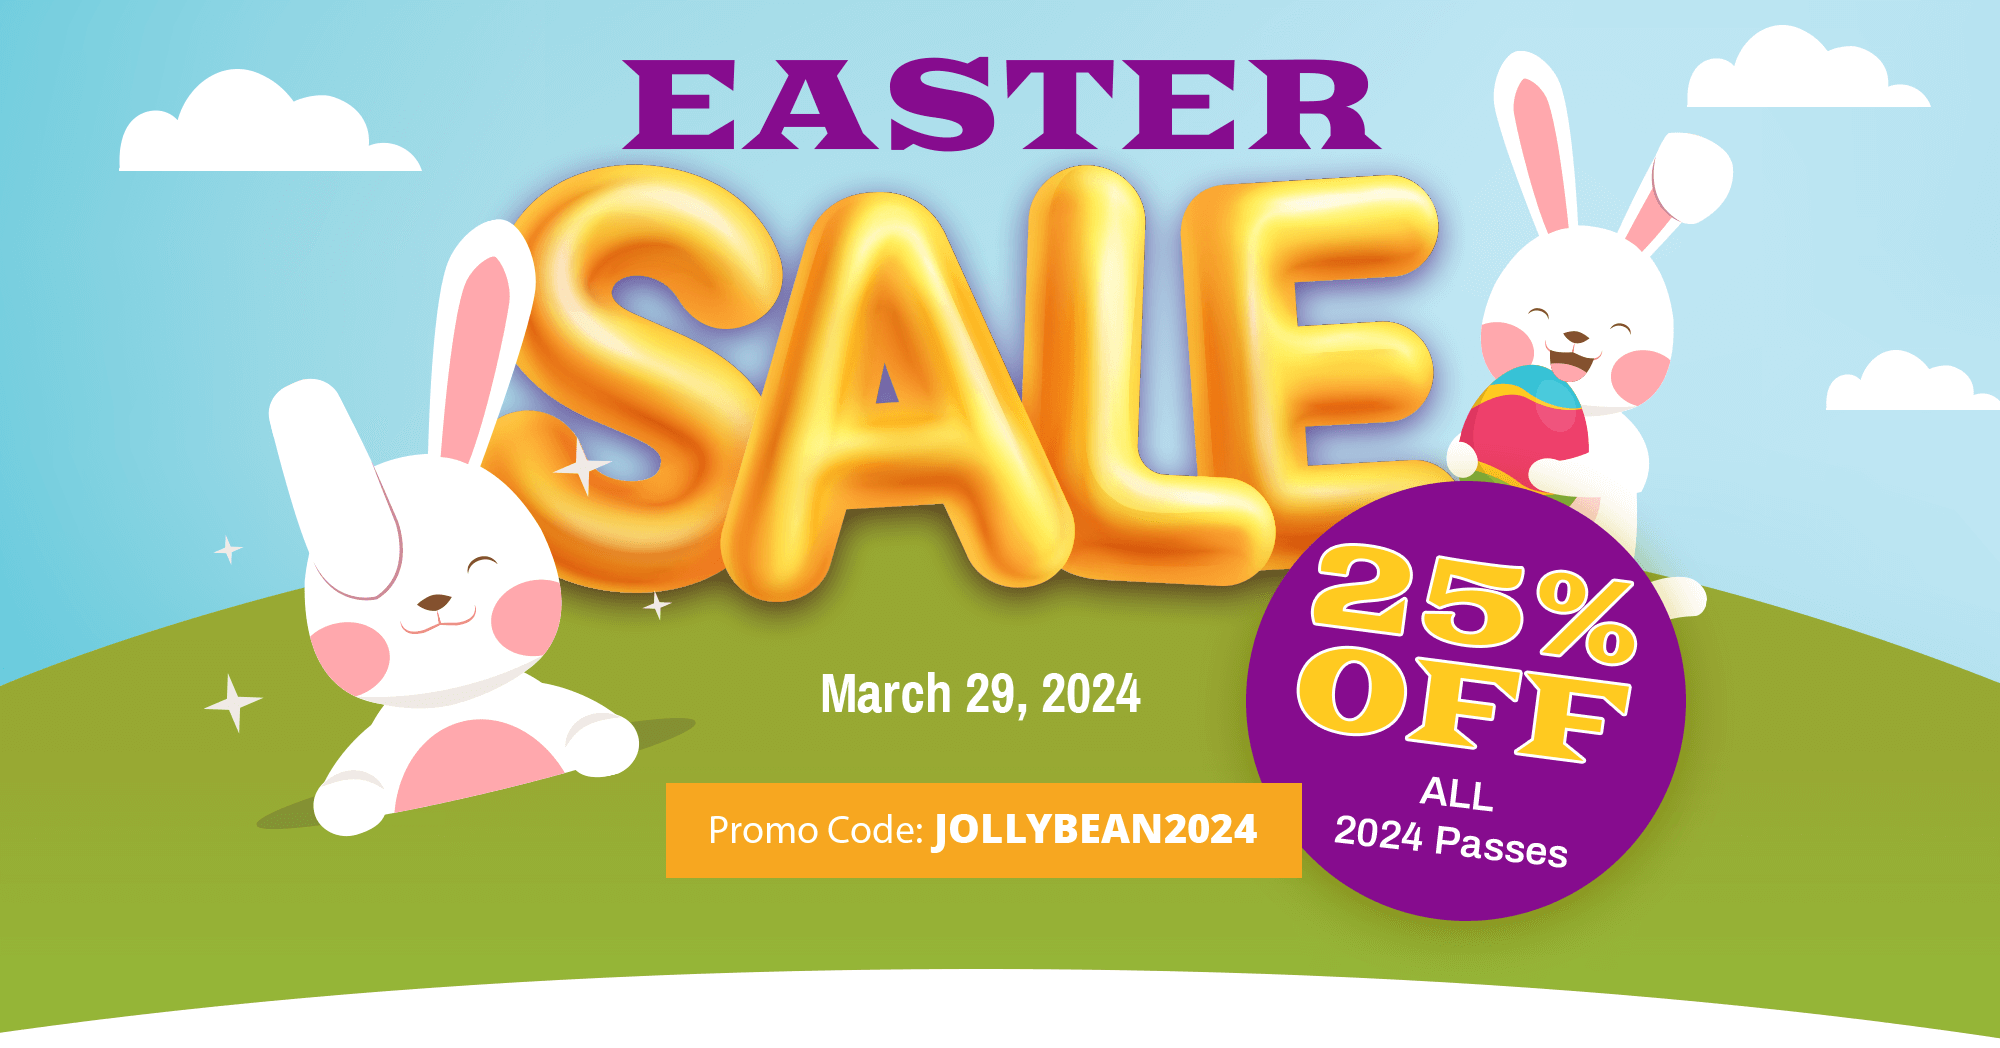 Easter Sale March 1 - March 28, 2024 | 25% Off all 2024 Passes | Promo Code: JOLLYBEAN2024